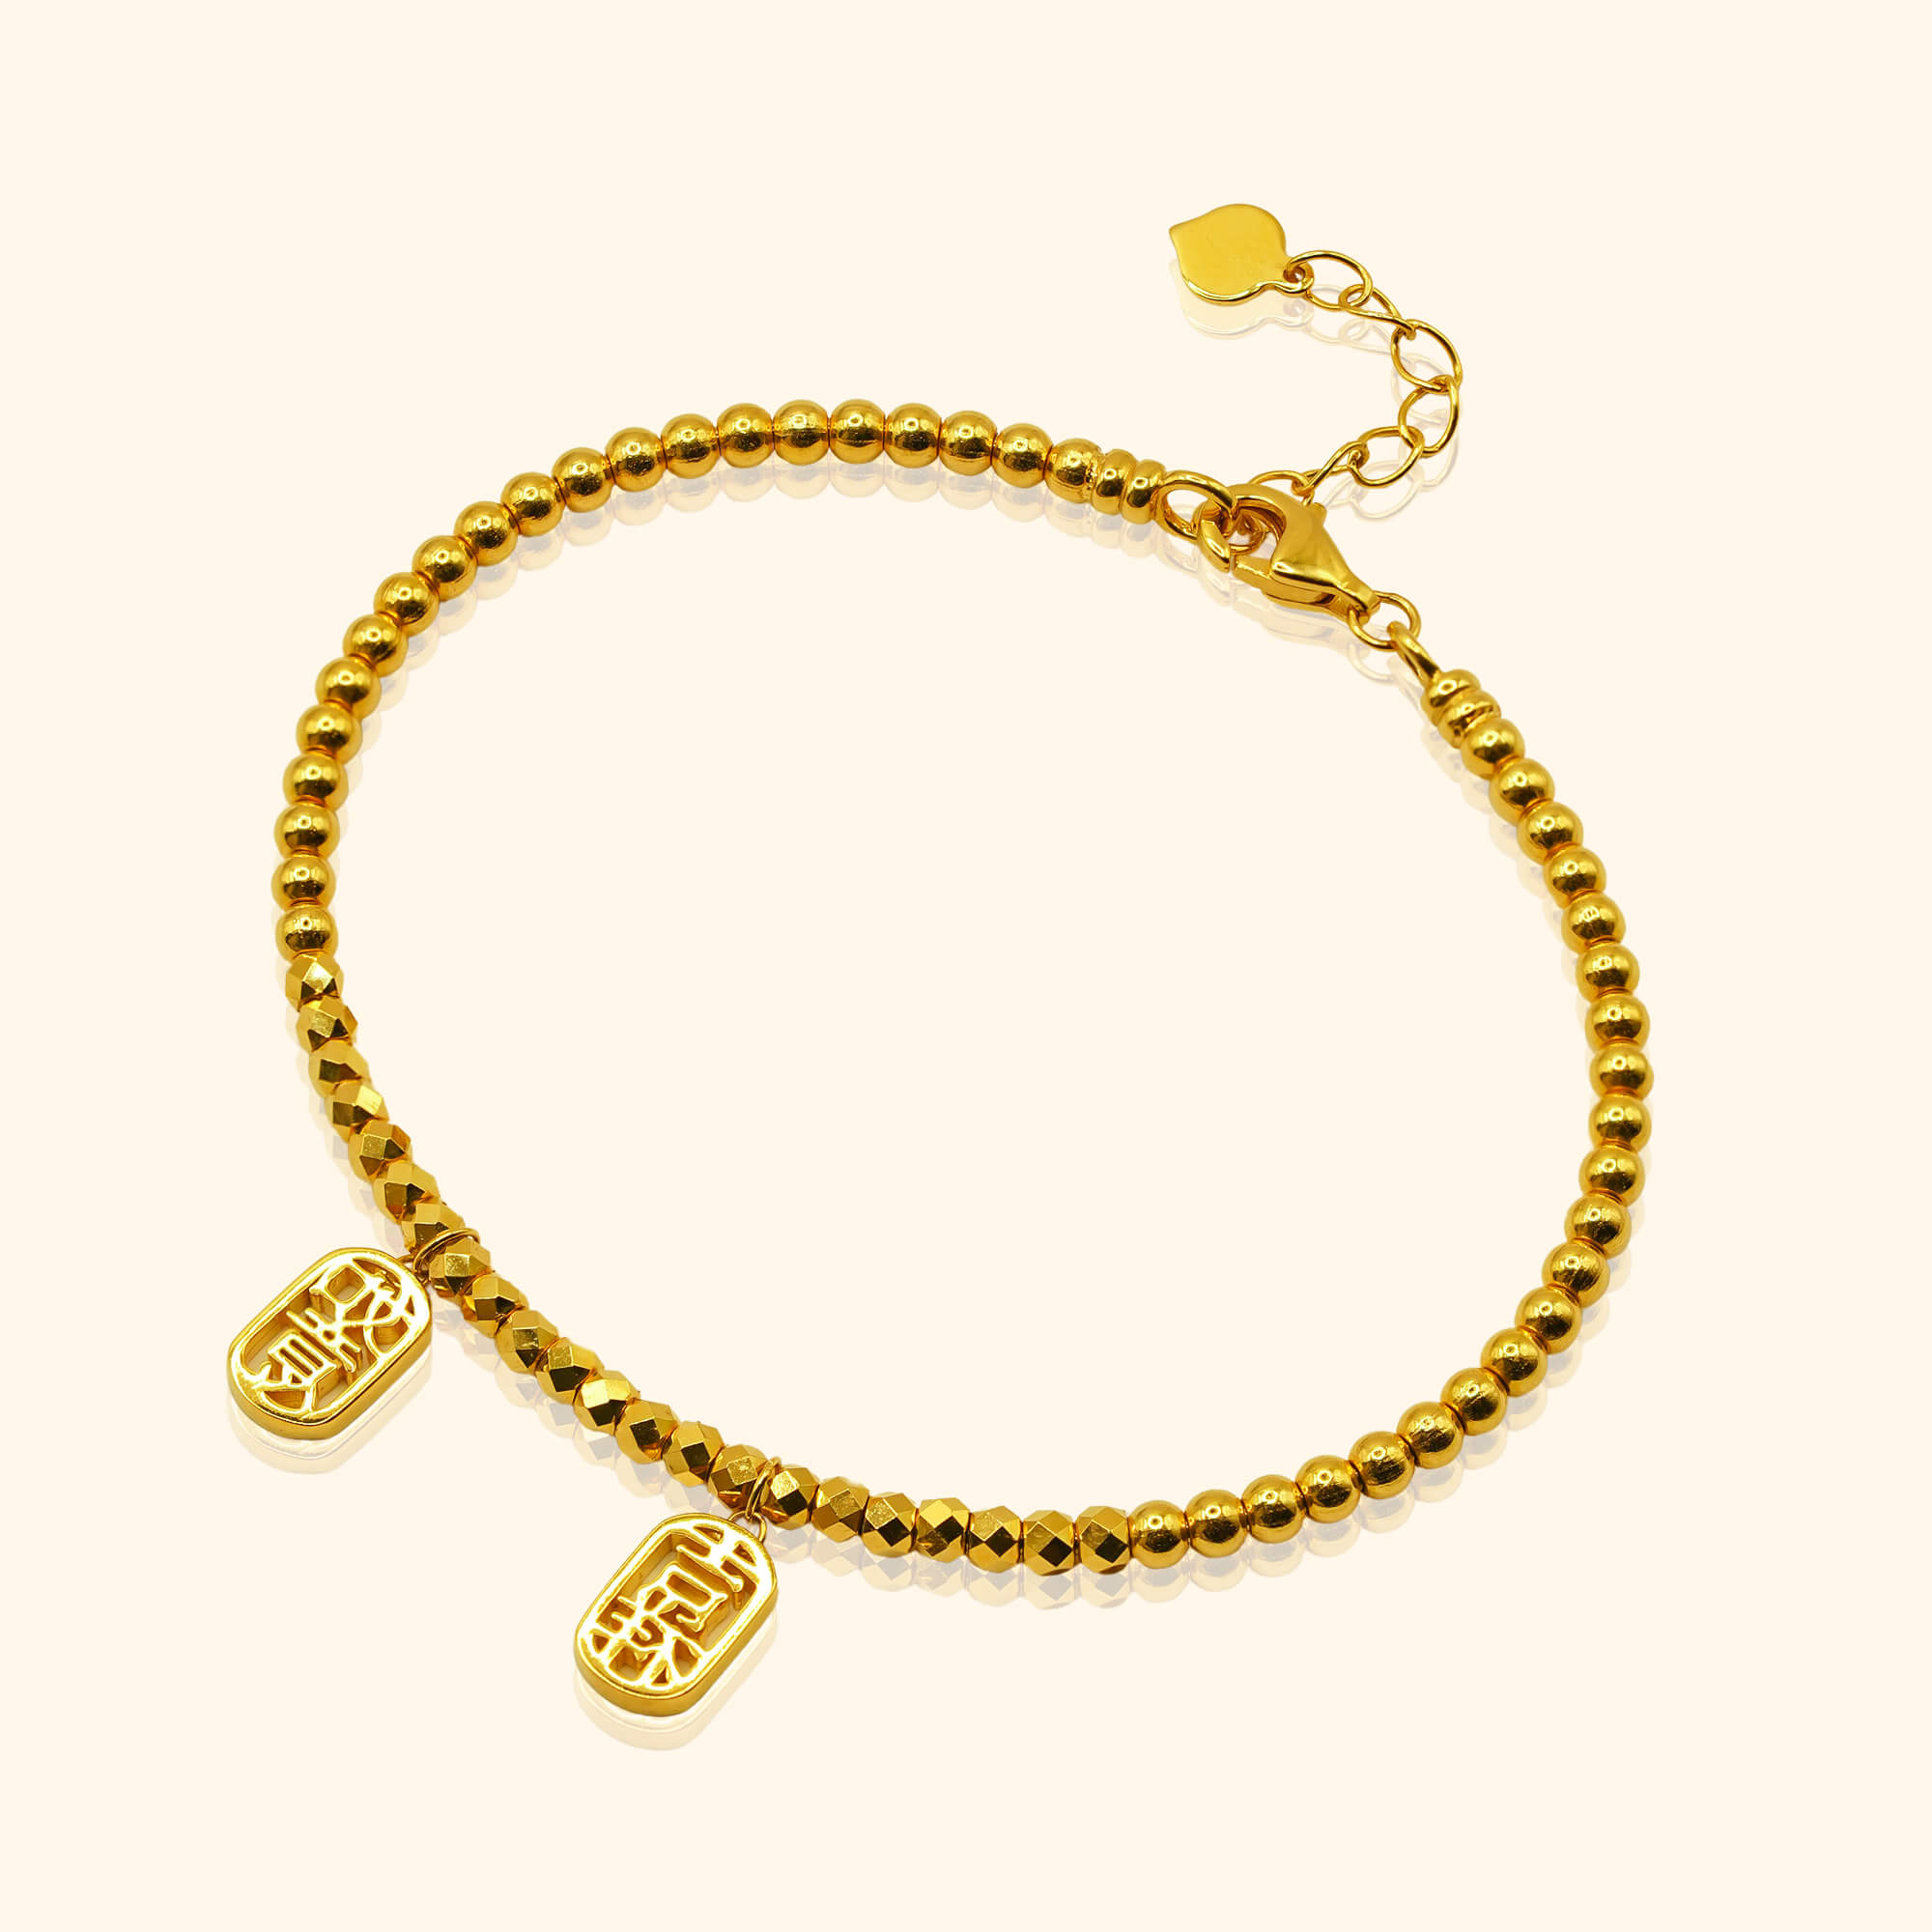 916 gold jewellery a bangle with a blessing spring design from top gold shop a cheapest gold jewellery in singapore